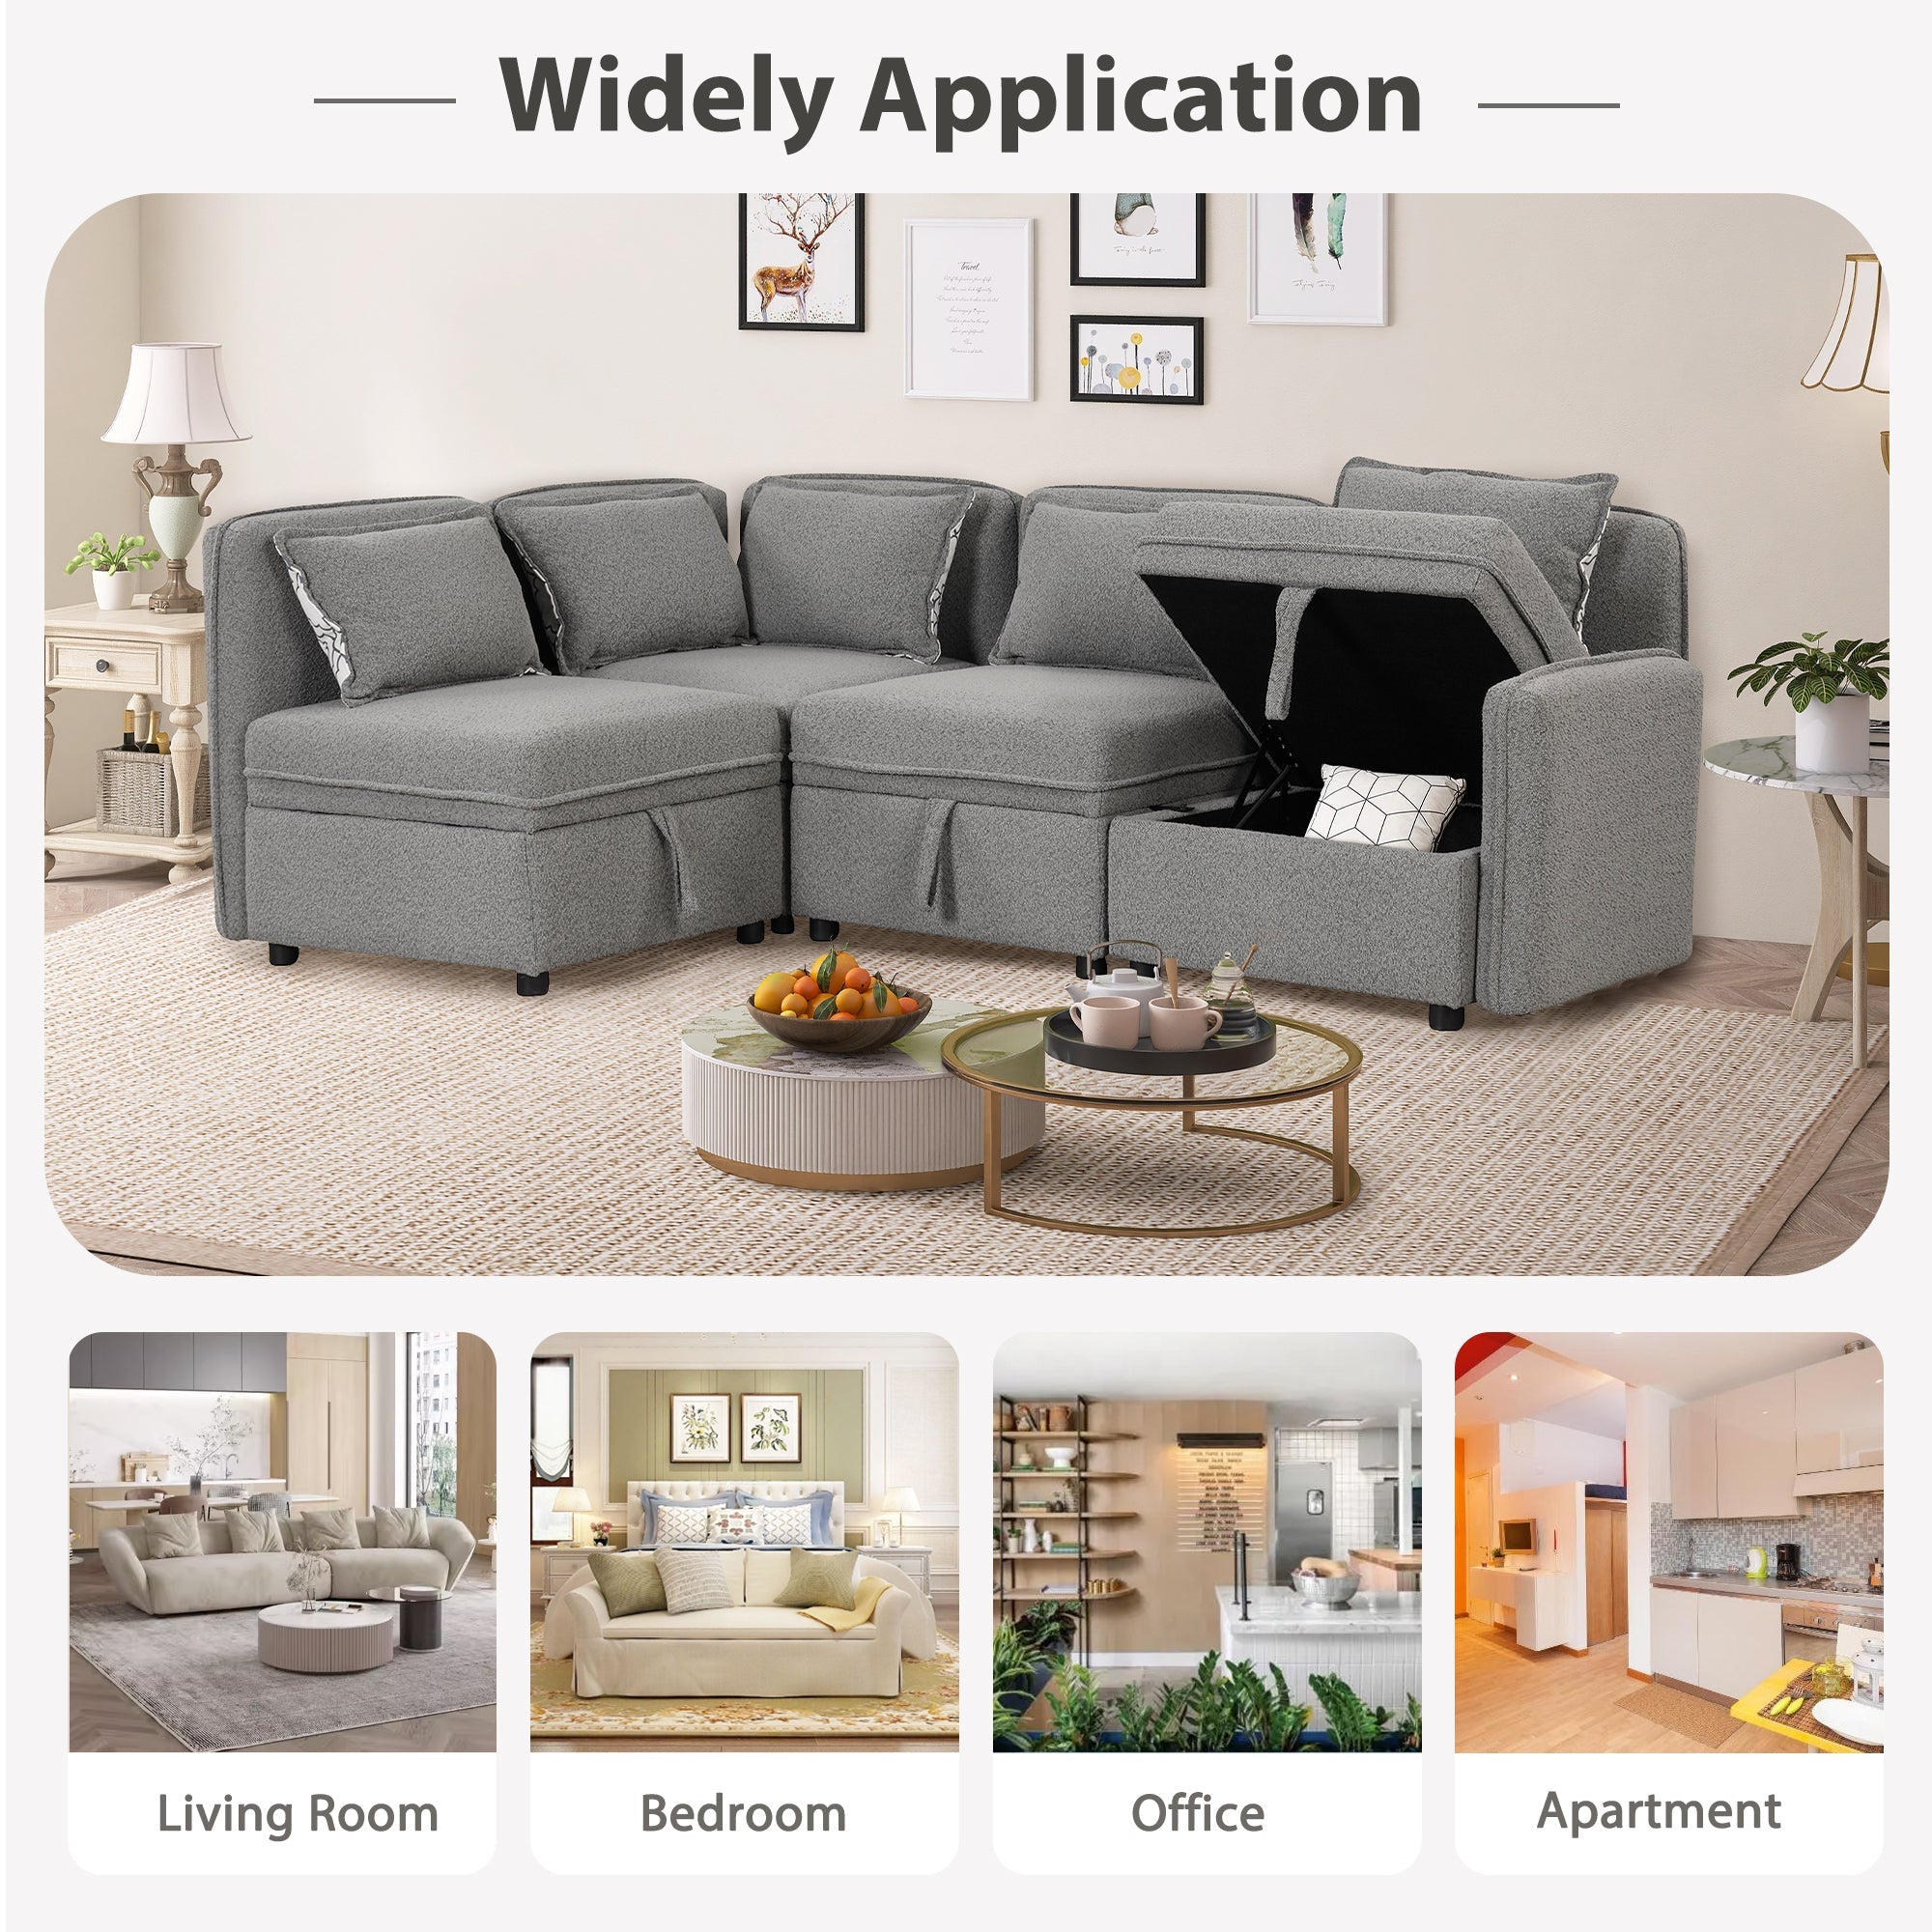 122.8" Convertible Modular Sofa | Chenille Fabric Sectional | 4 Seater with Pillows | Gray-Stationary Sectionals-American Furniture Outlet